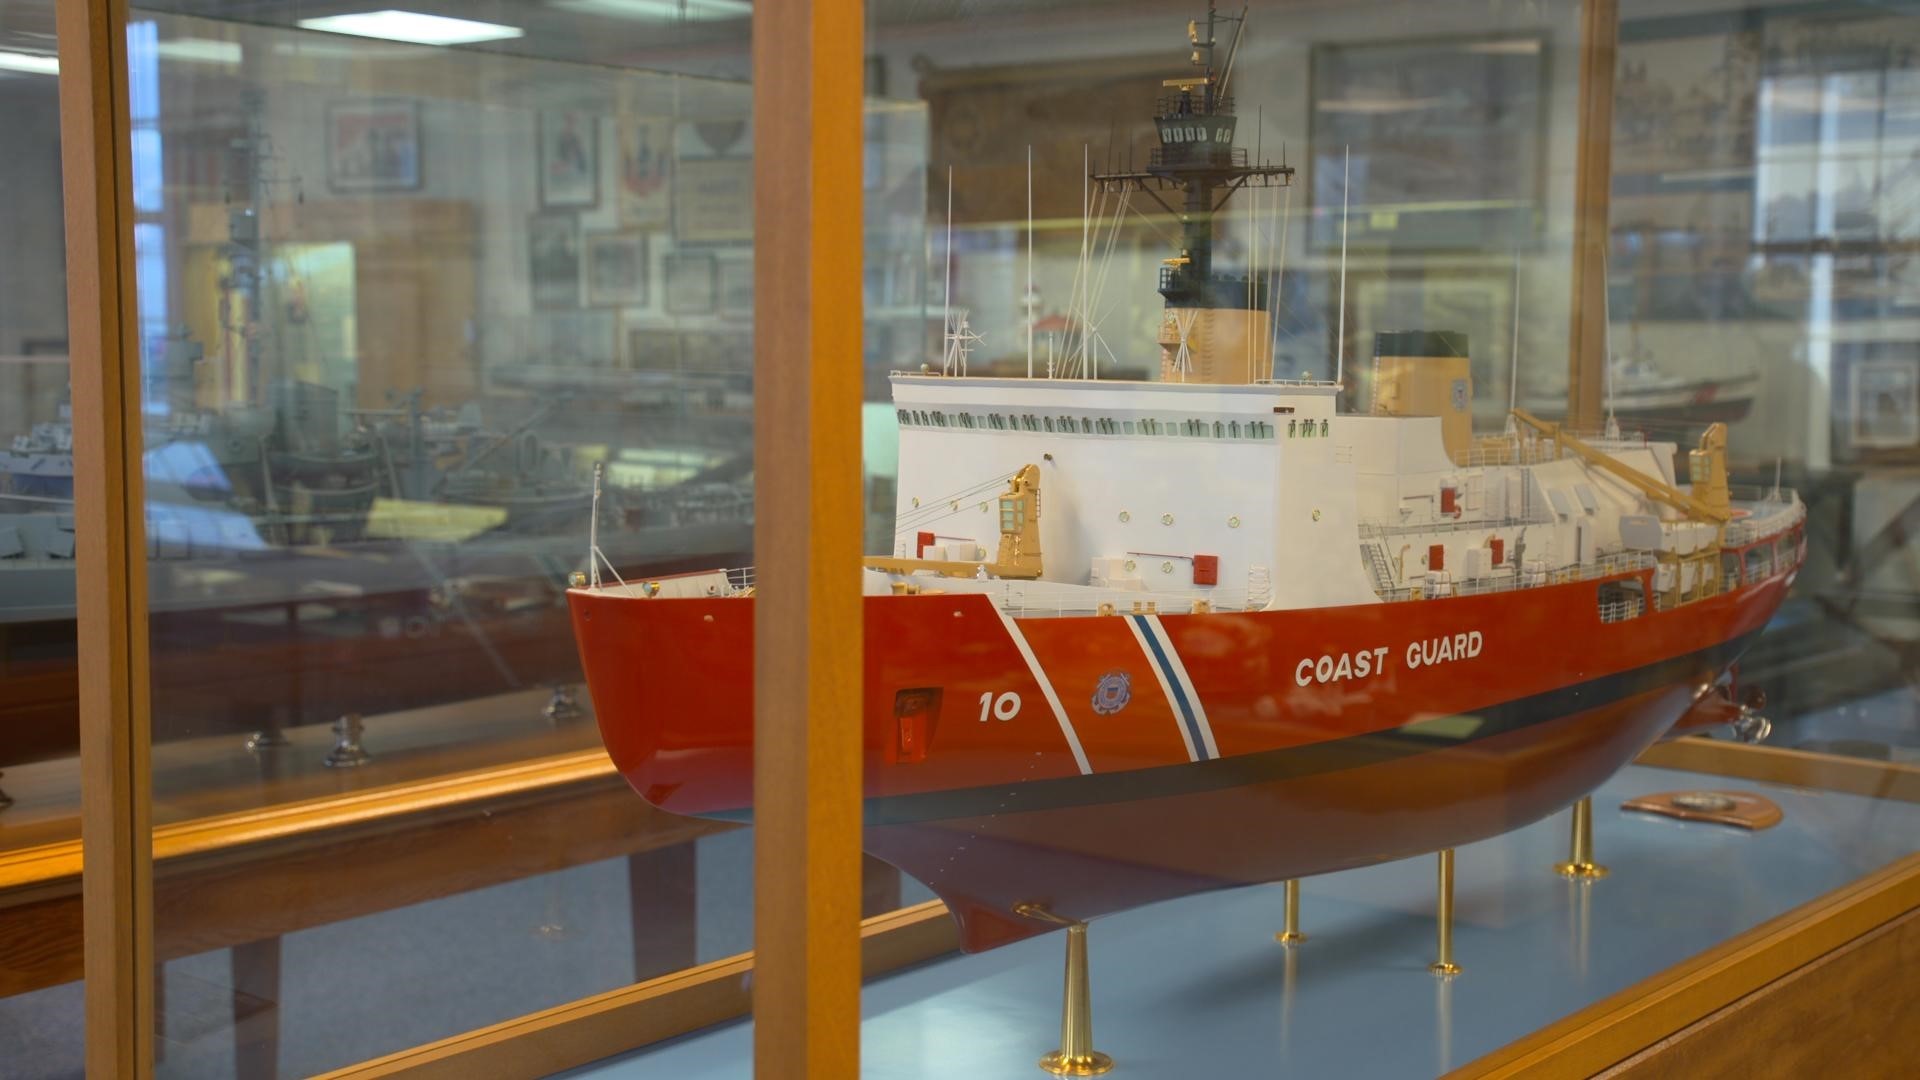 The museum houses nearly 20,000 photos, 5,000 books and more than a dozen large-scale models. #k5evening